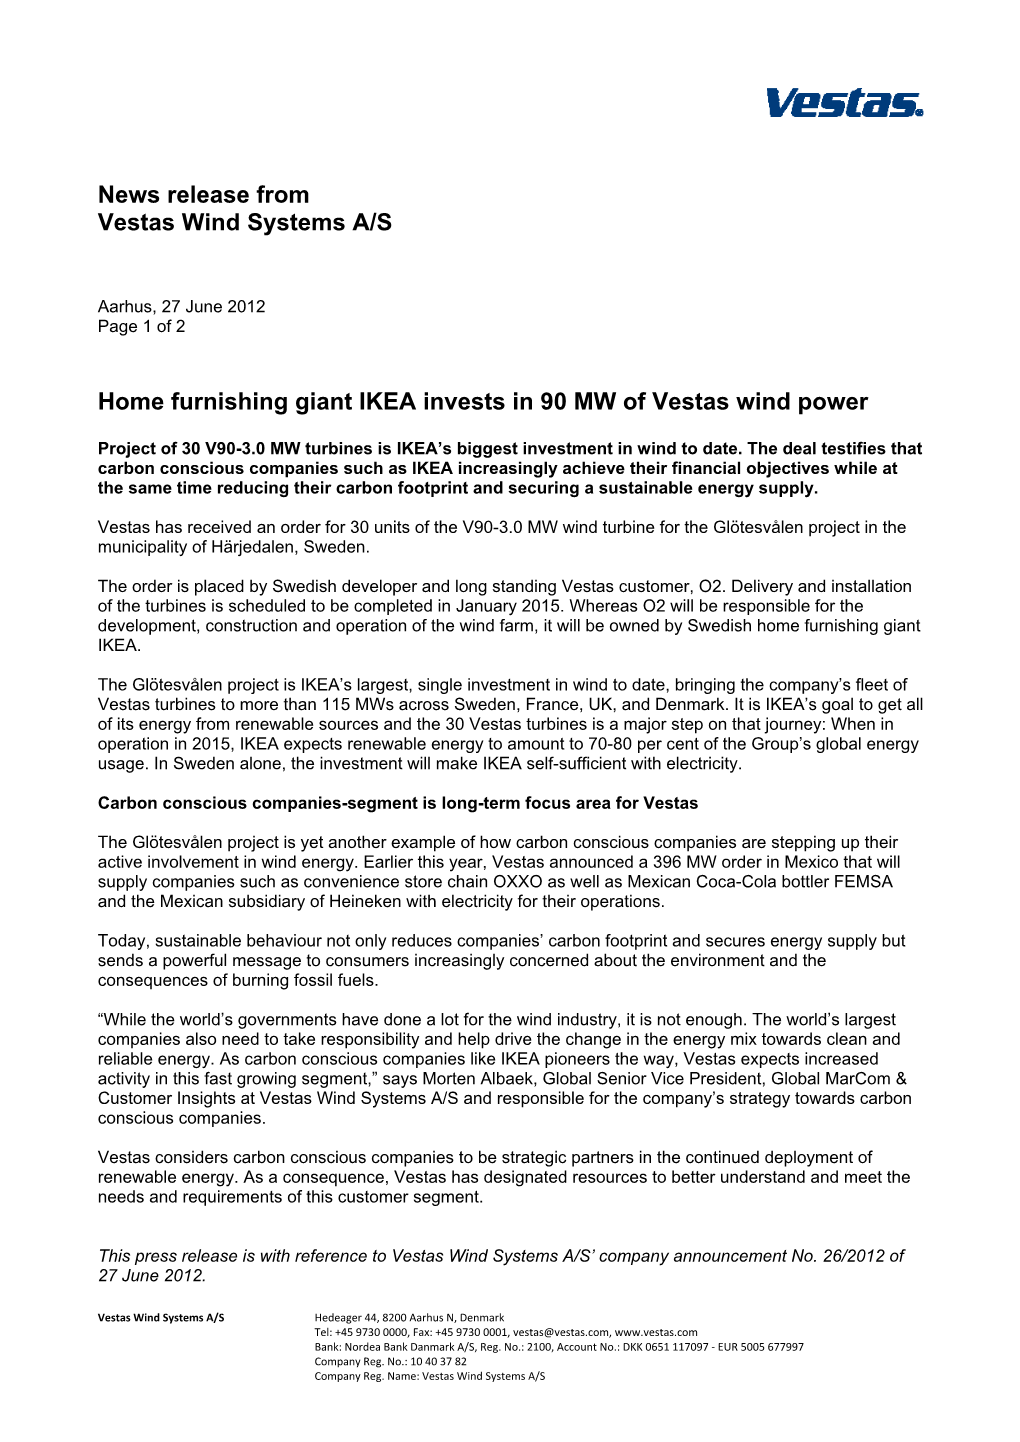 News Release from Vestas Wind Systems A/S Home Furnishing Giant IKEA Invests in 90 MW of Vestas Wind Power